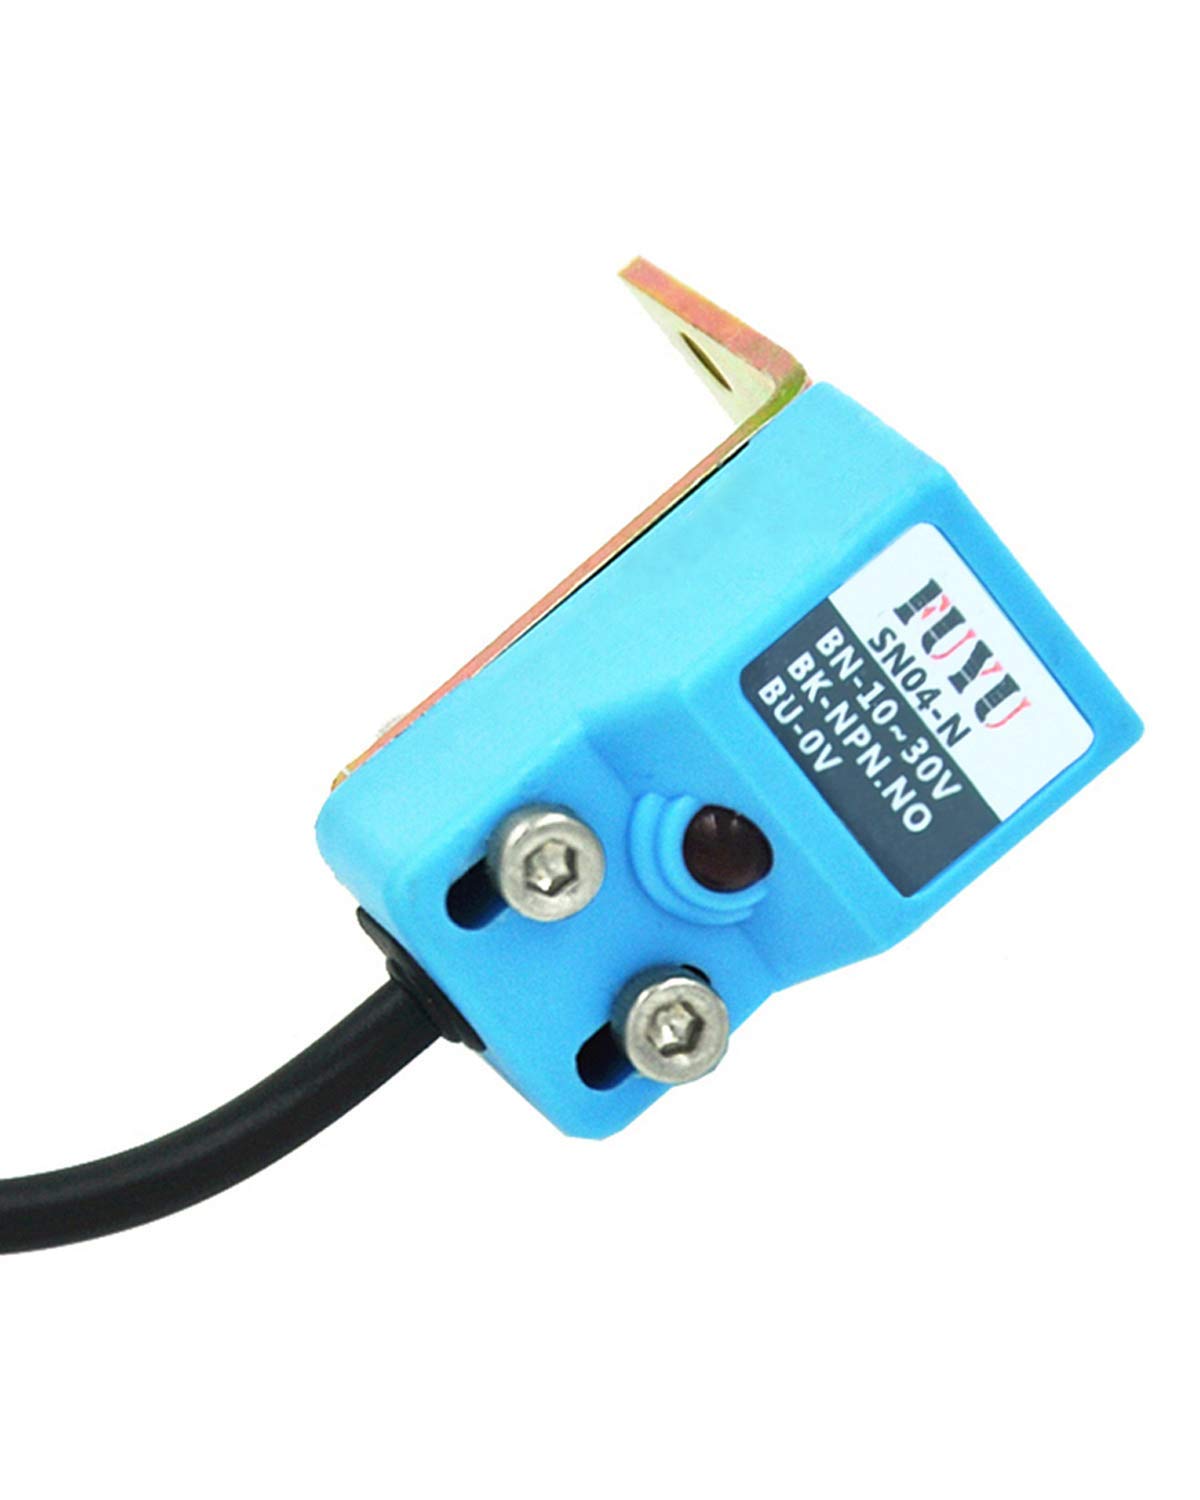 Electromagnetic Induction Limit Switch for Linear Motion System